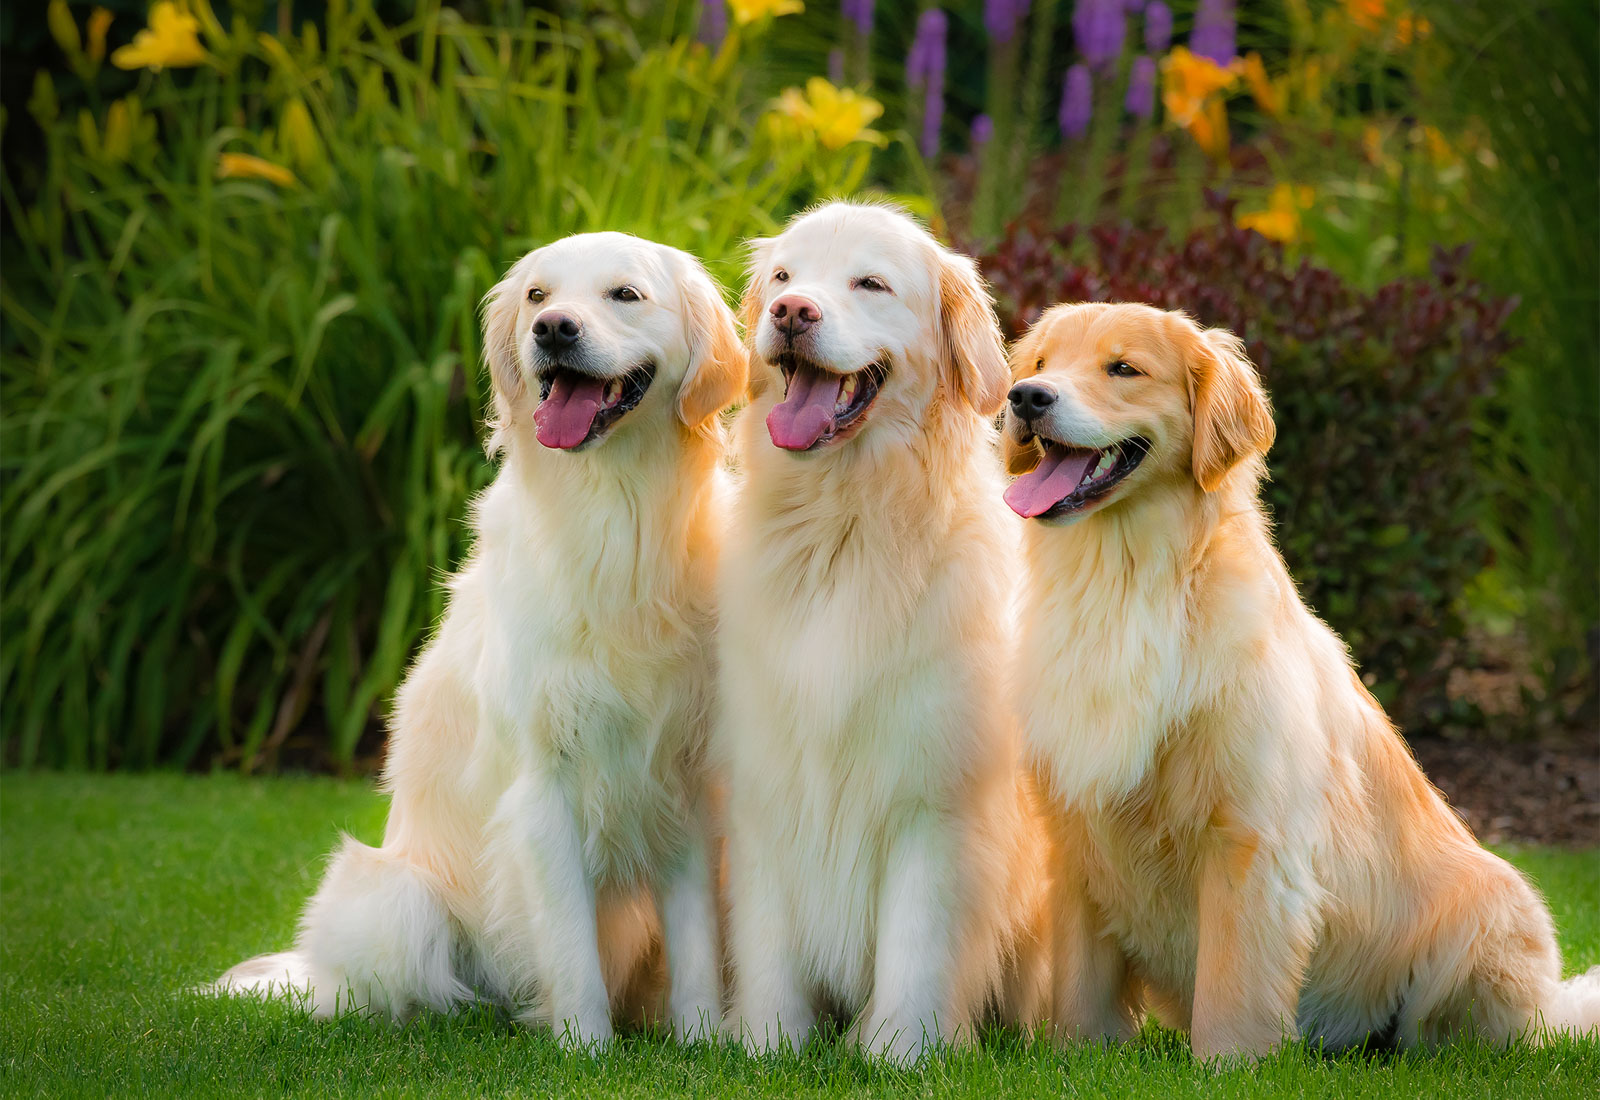 Three Golden Retrievers smiling on a summer day